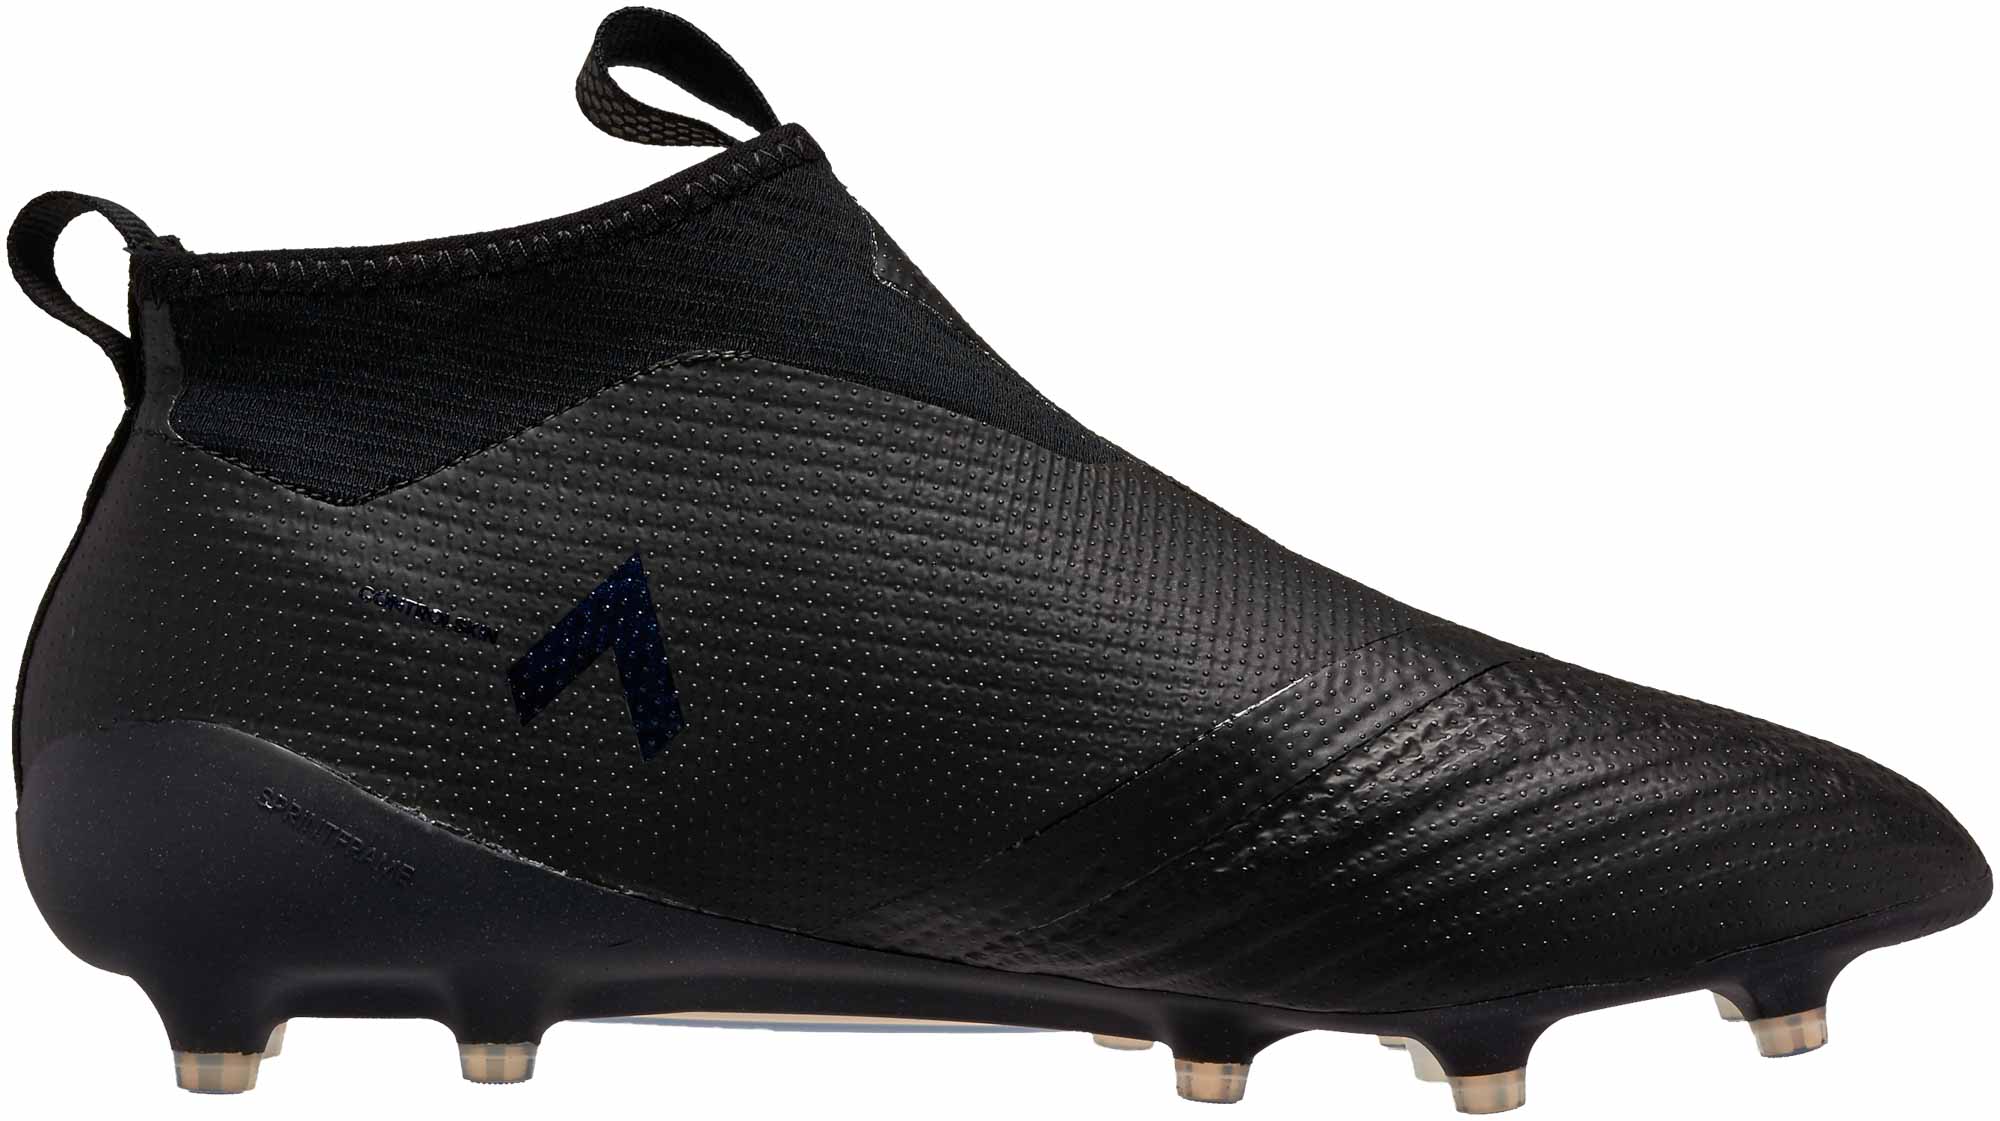 adidas all black soccer cleats | Great 